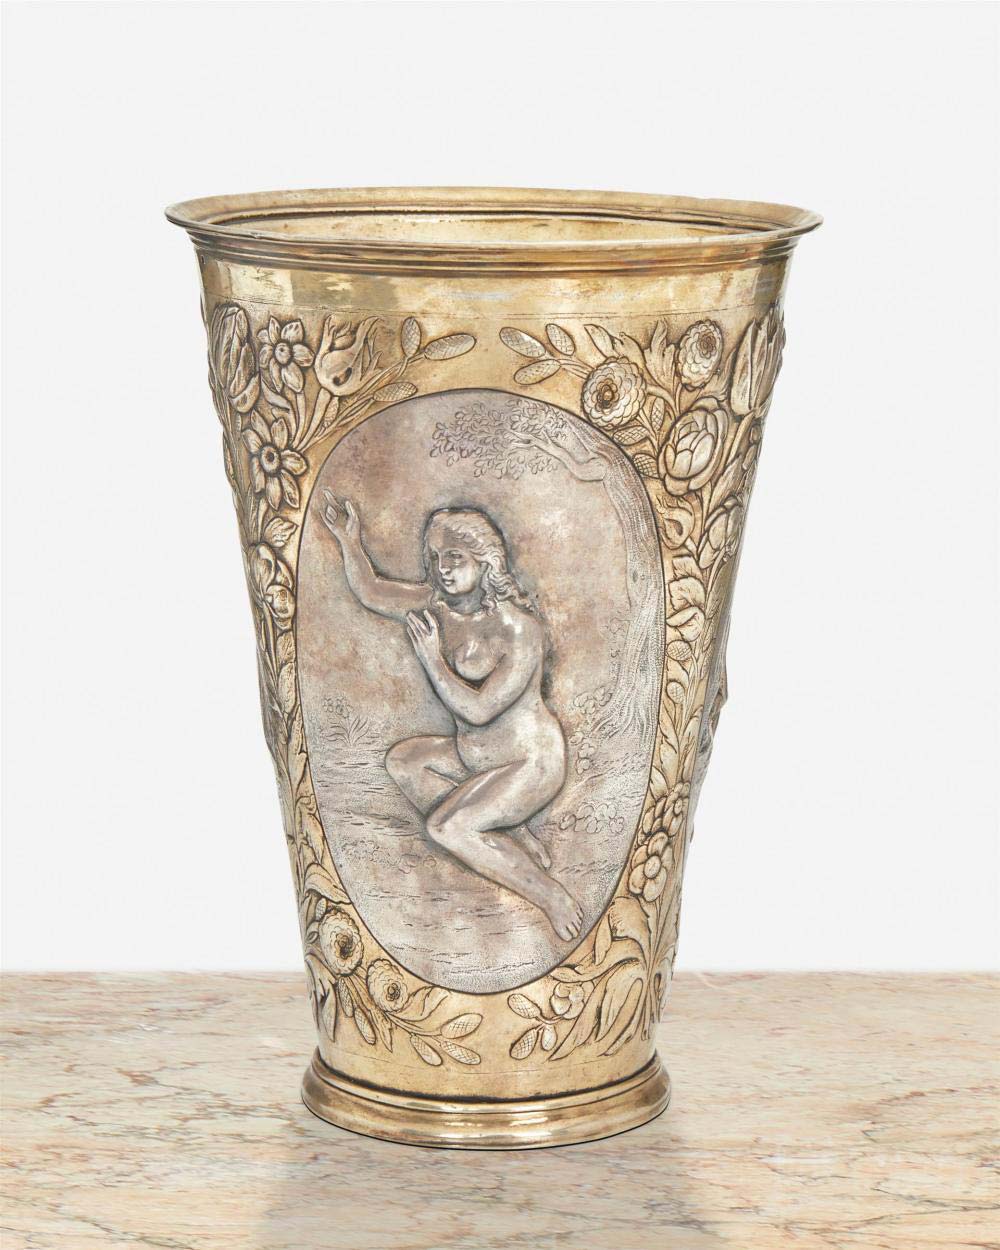 Russian parcel-gilt silver figural drinking vessel , $3,750. Image courtesy John Moran Auctioneers